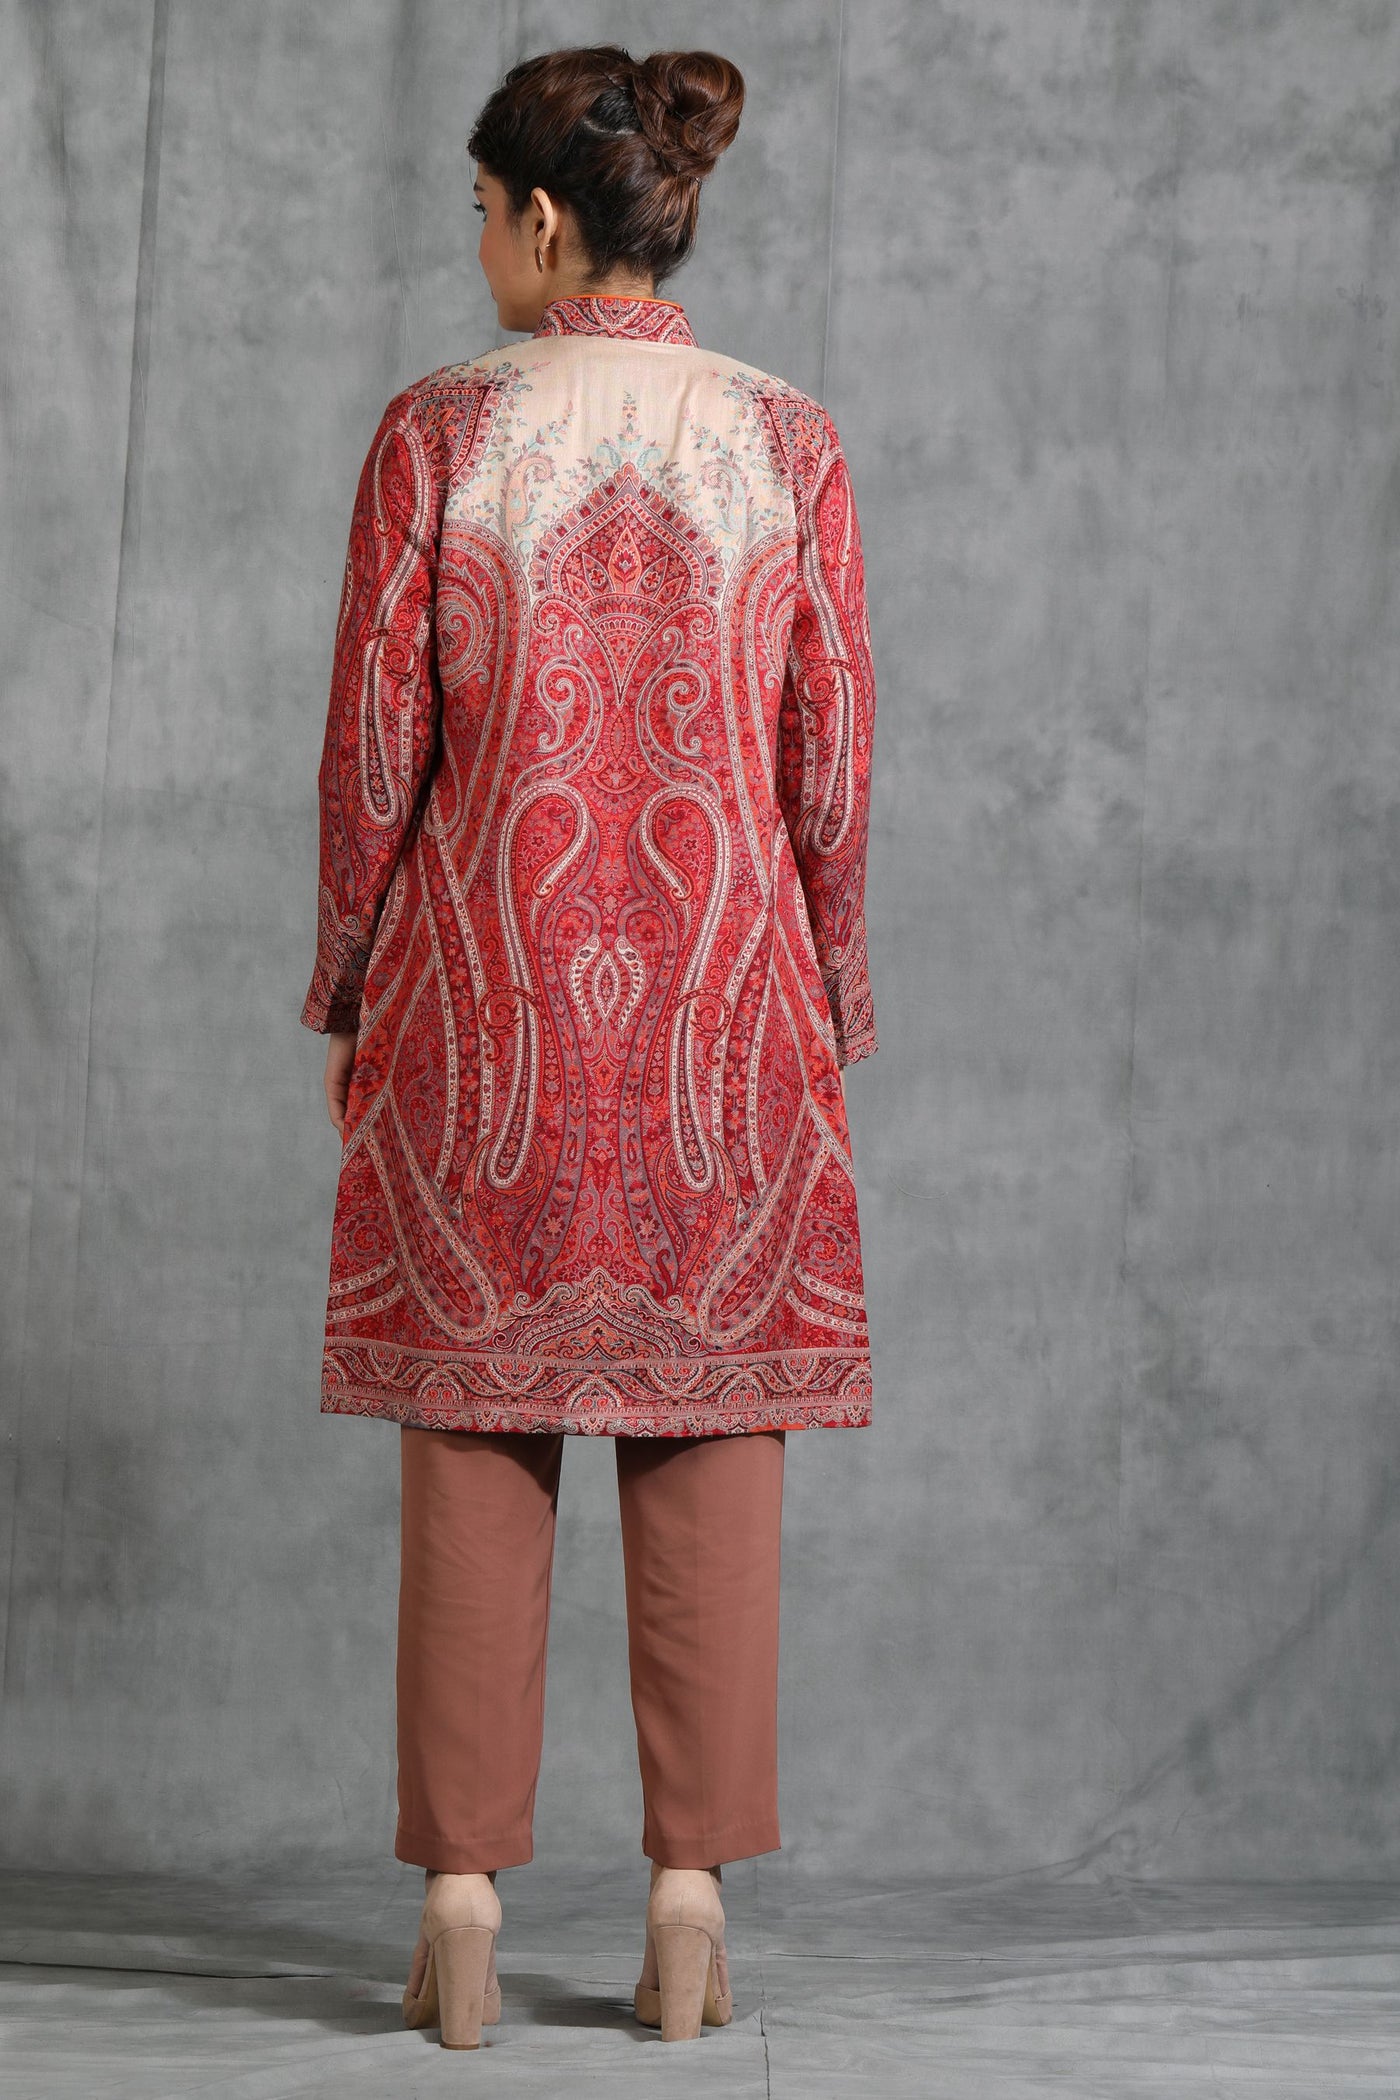 Vintage Full Jacket With Paisley Design